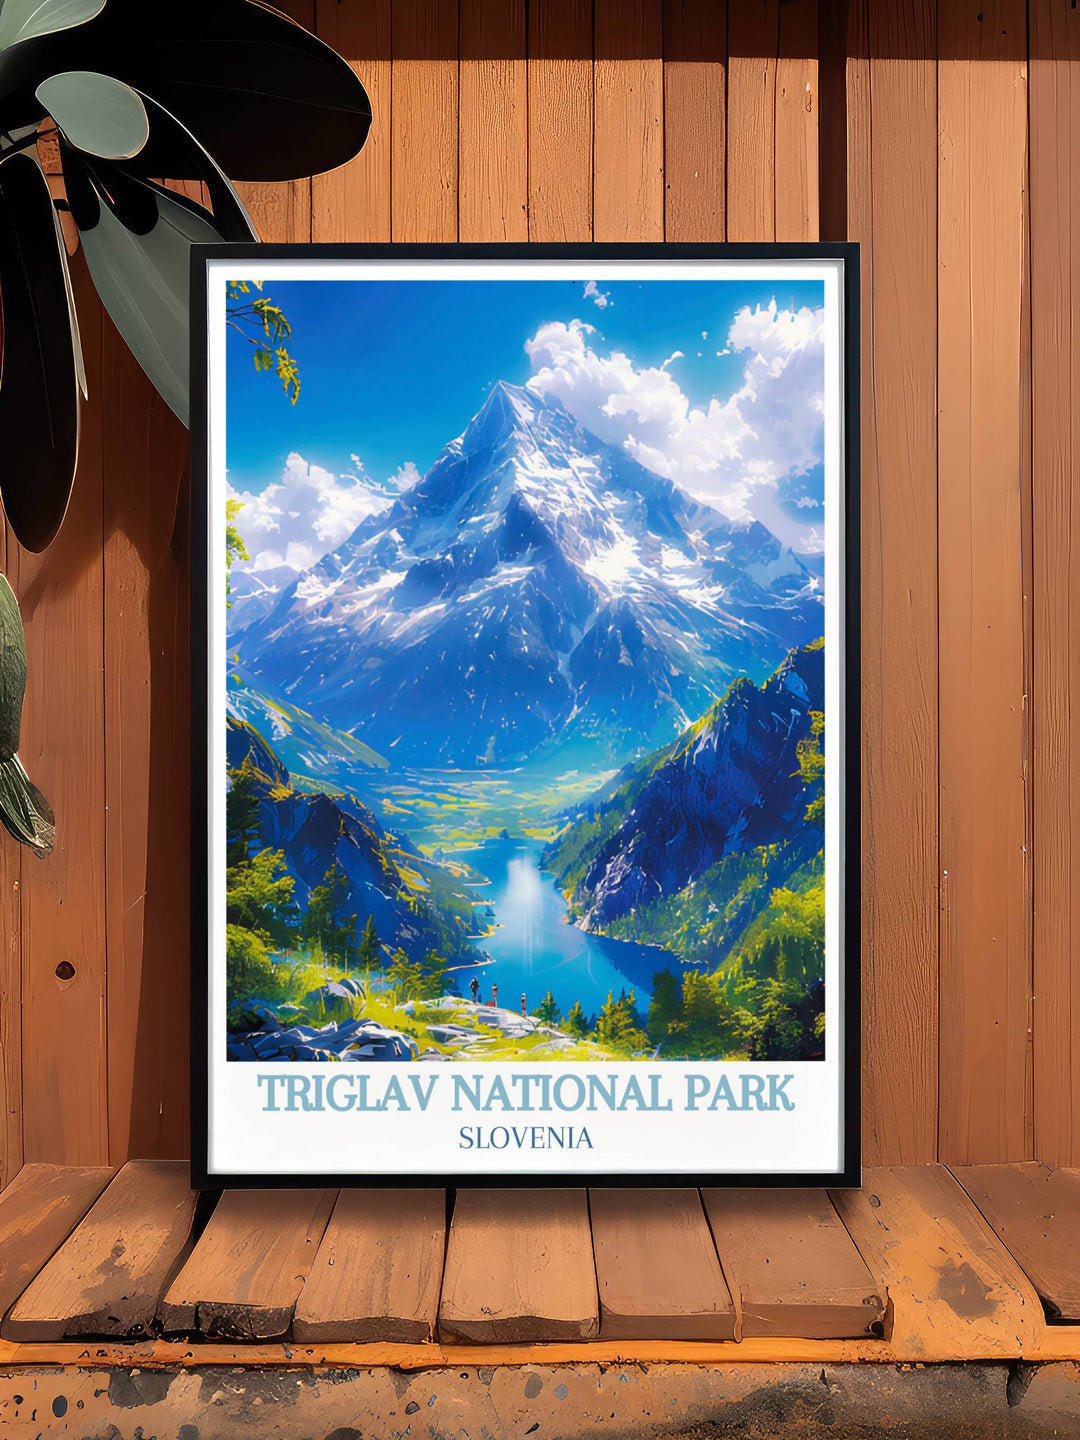 Triglav National Park wall art featuring the breathtaking scenery of Slovenias Julian Alps, with vibrant colors and fine details capturing the majestic peaks and serene lakes of this iconic national park.